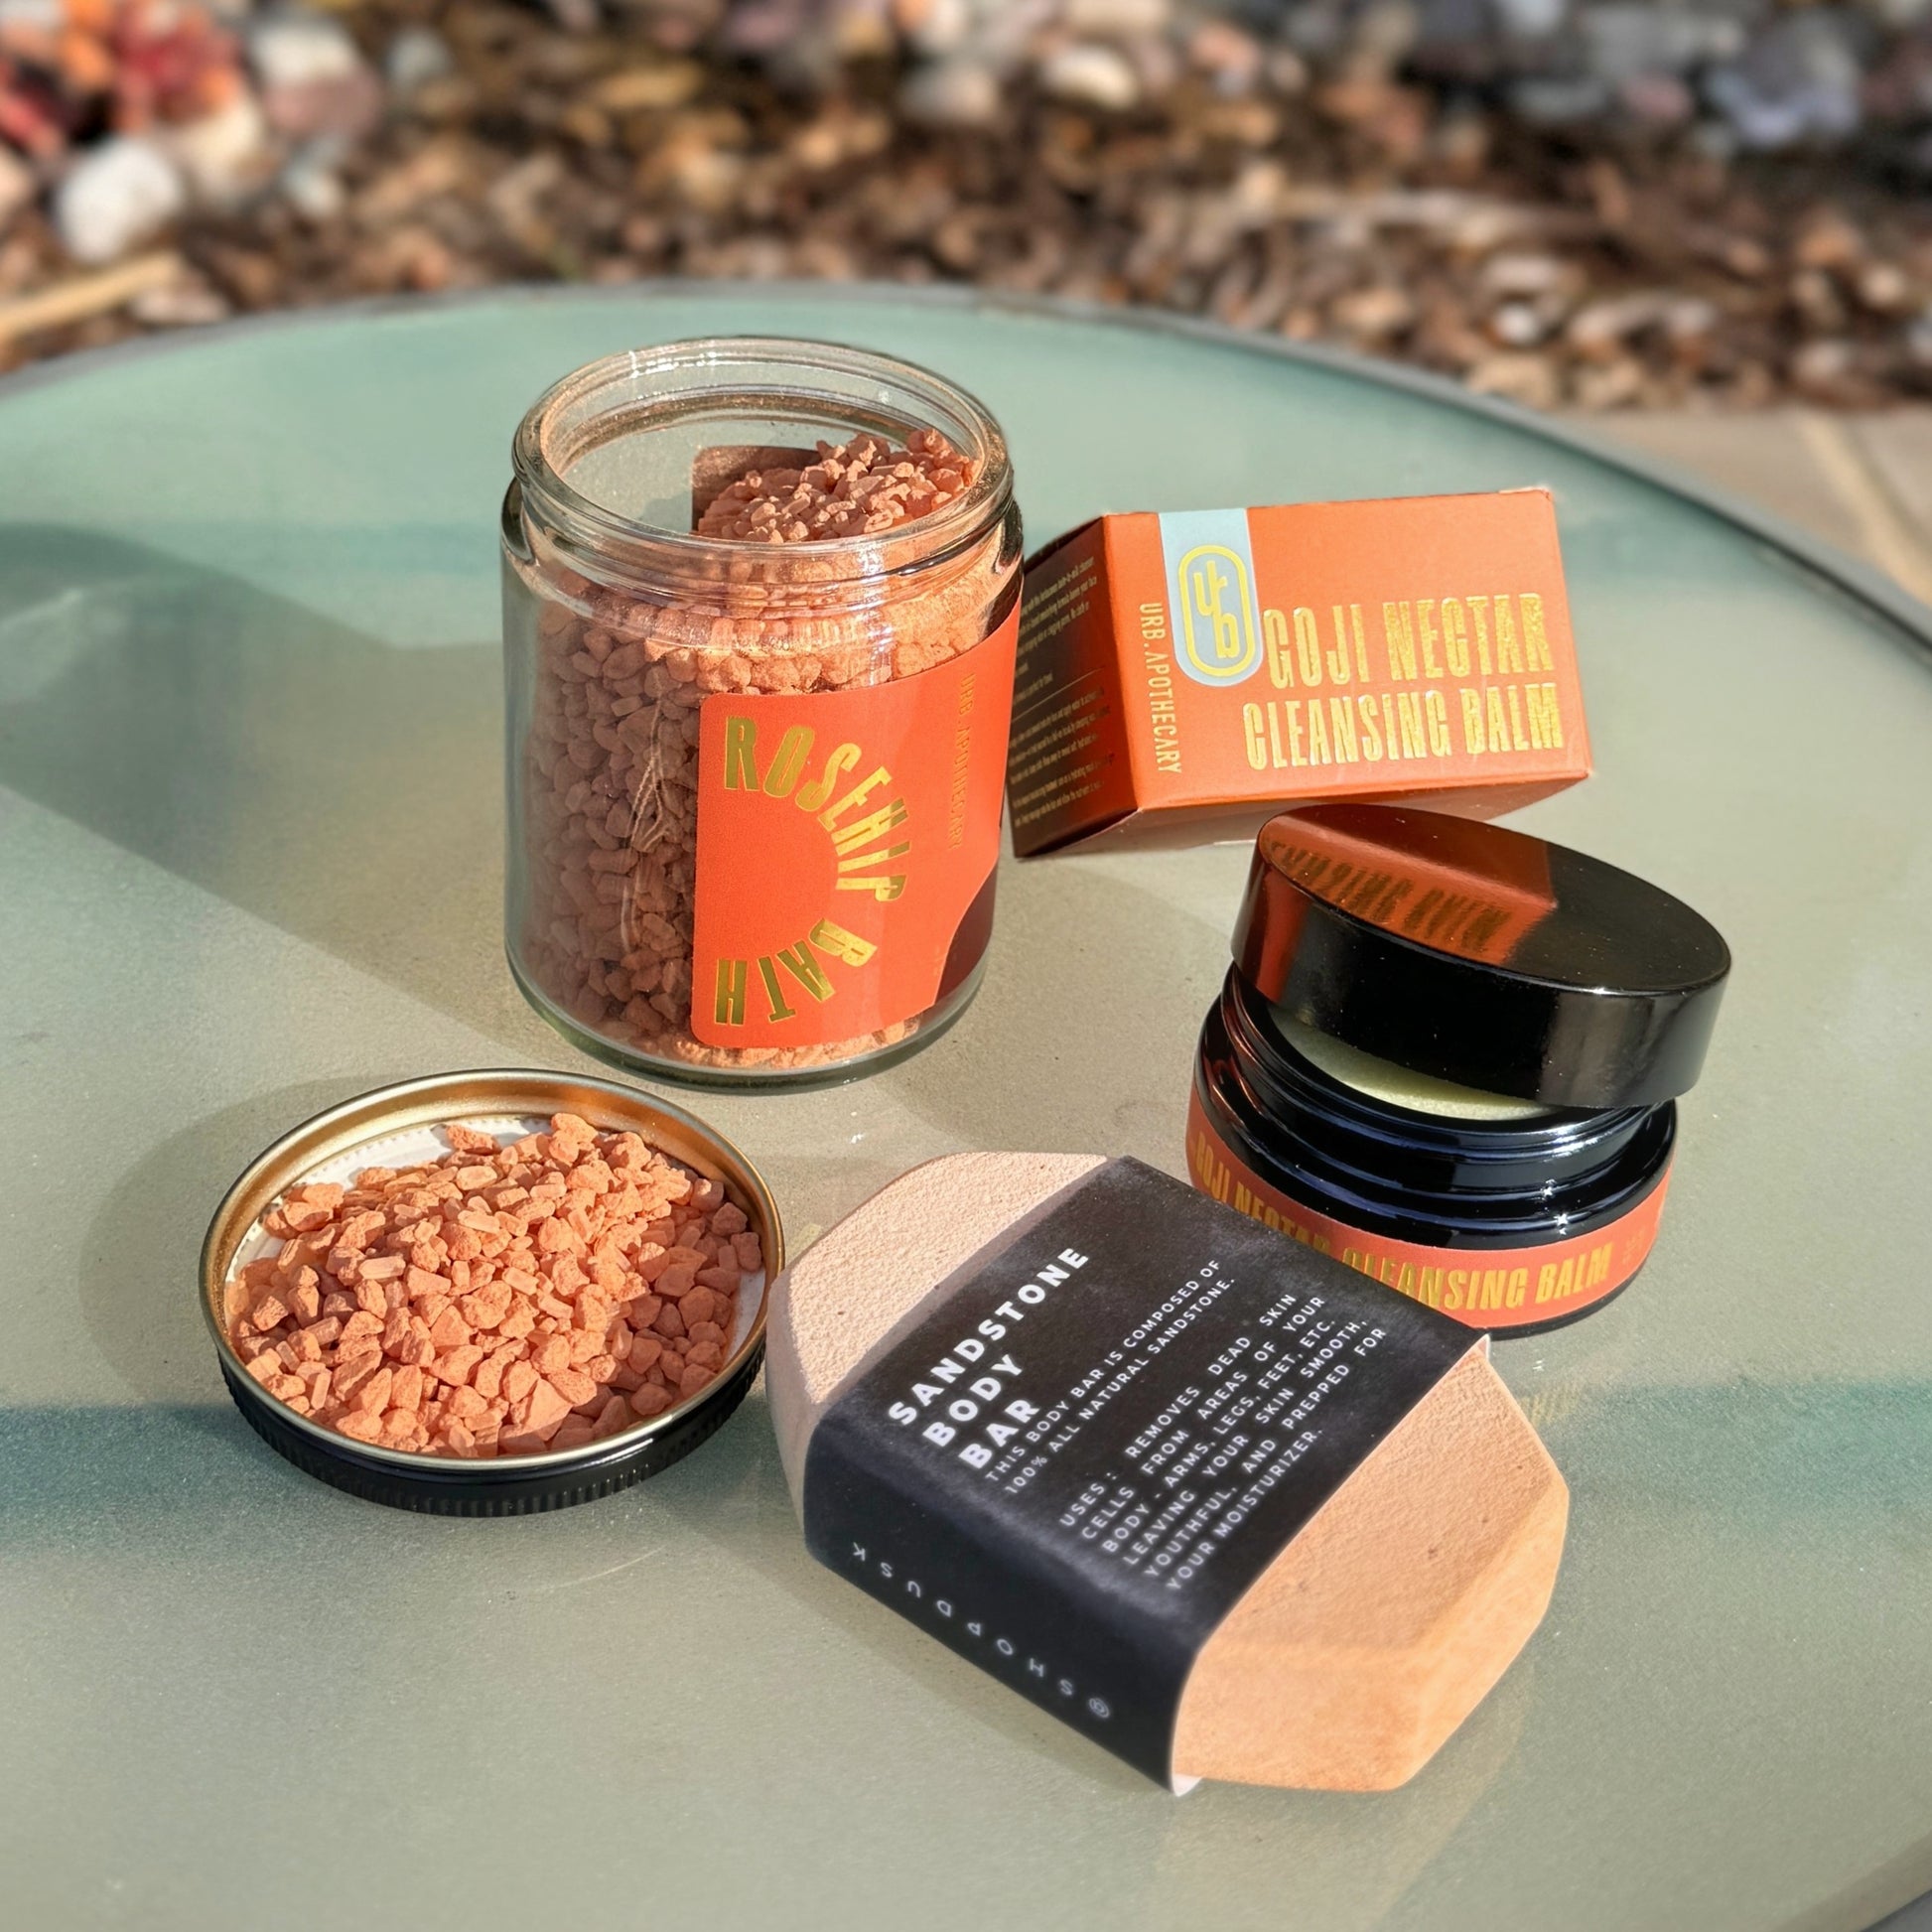 The products included in the Scrubbed Self-Care box on a table outside